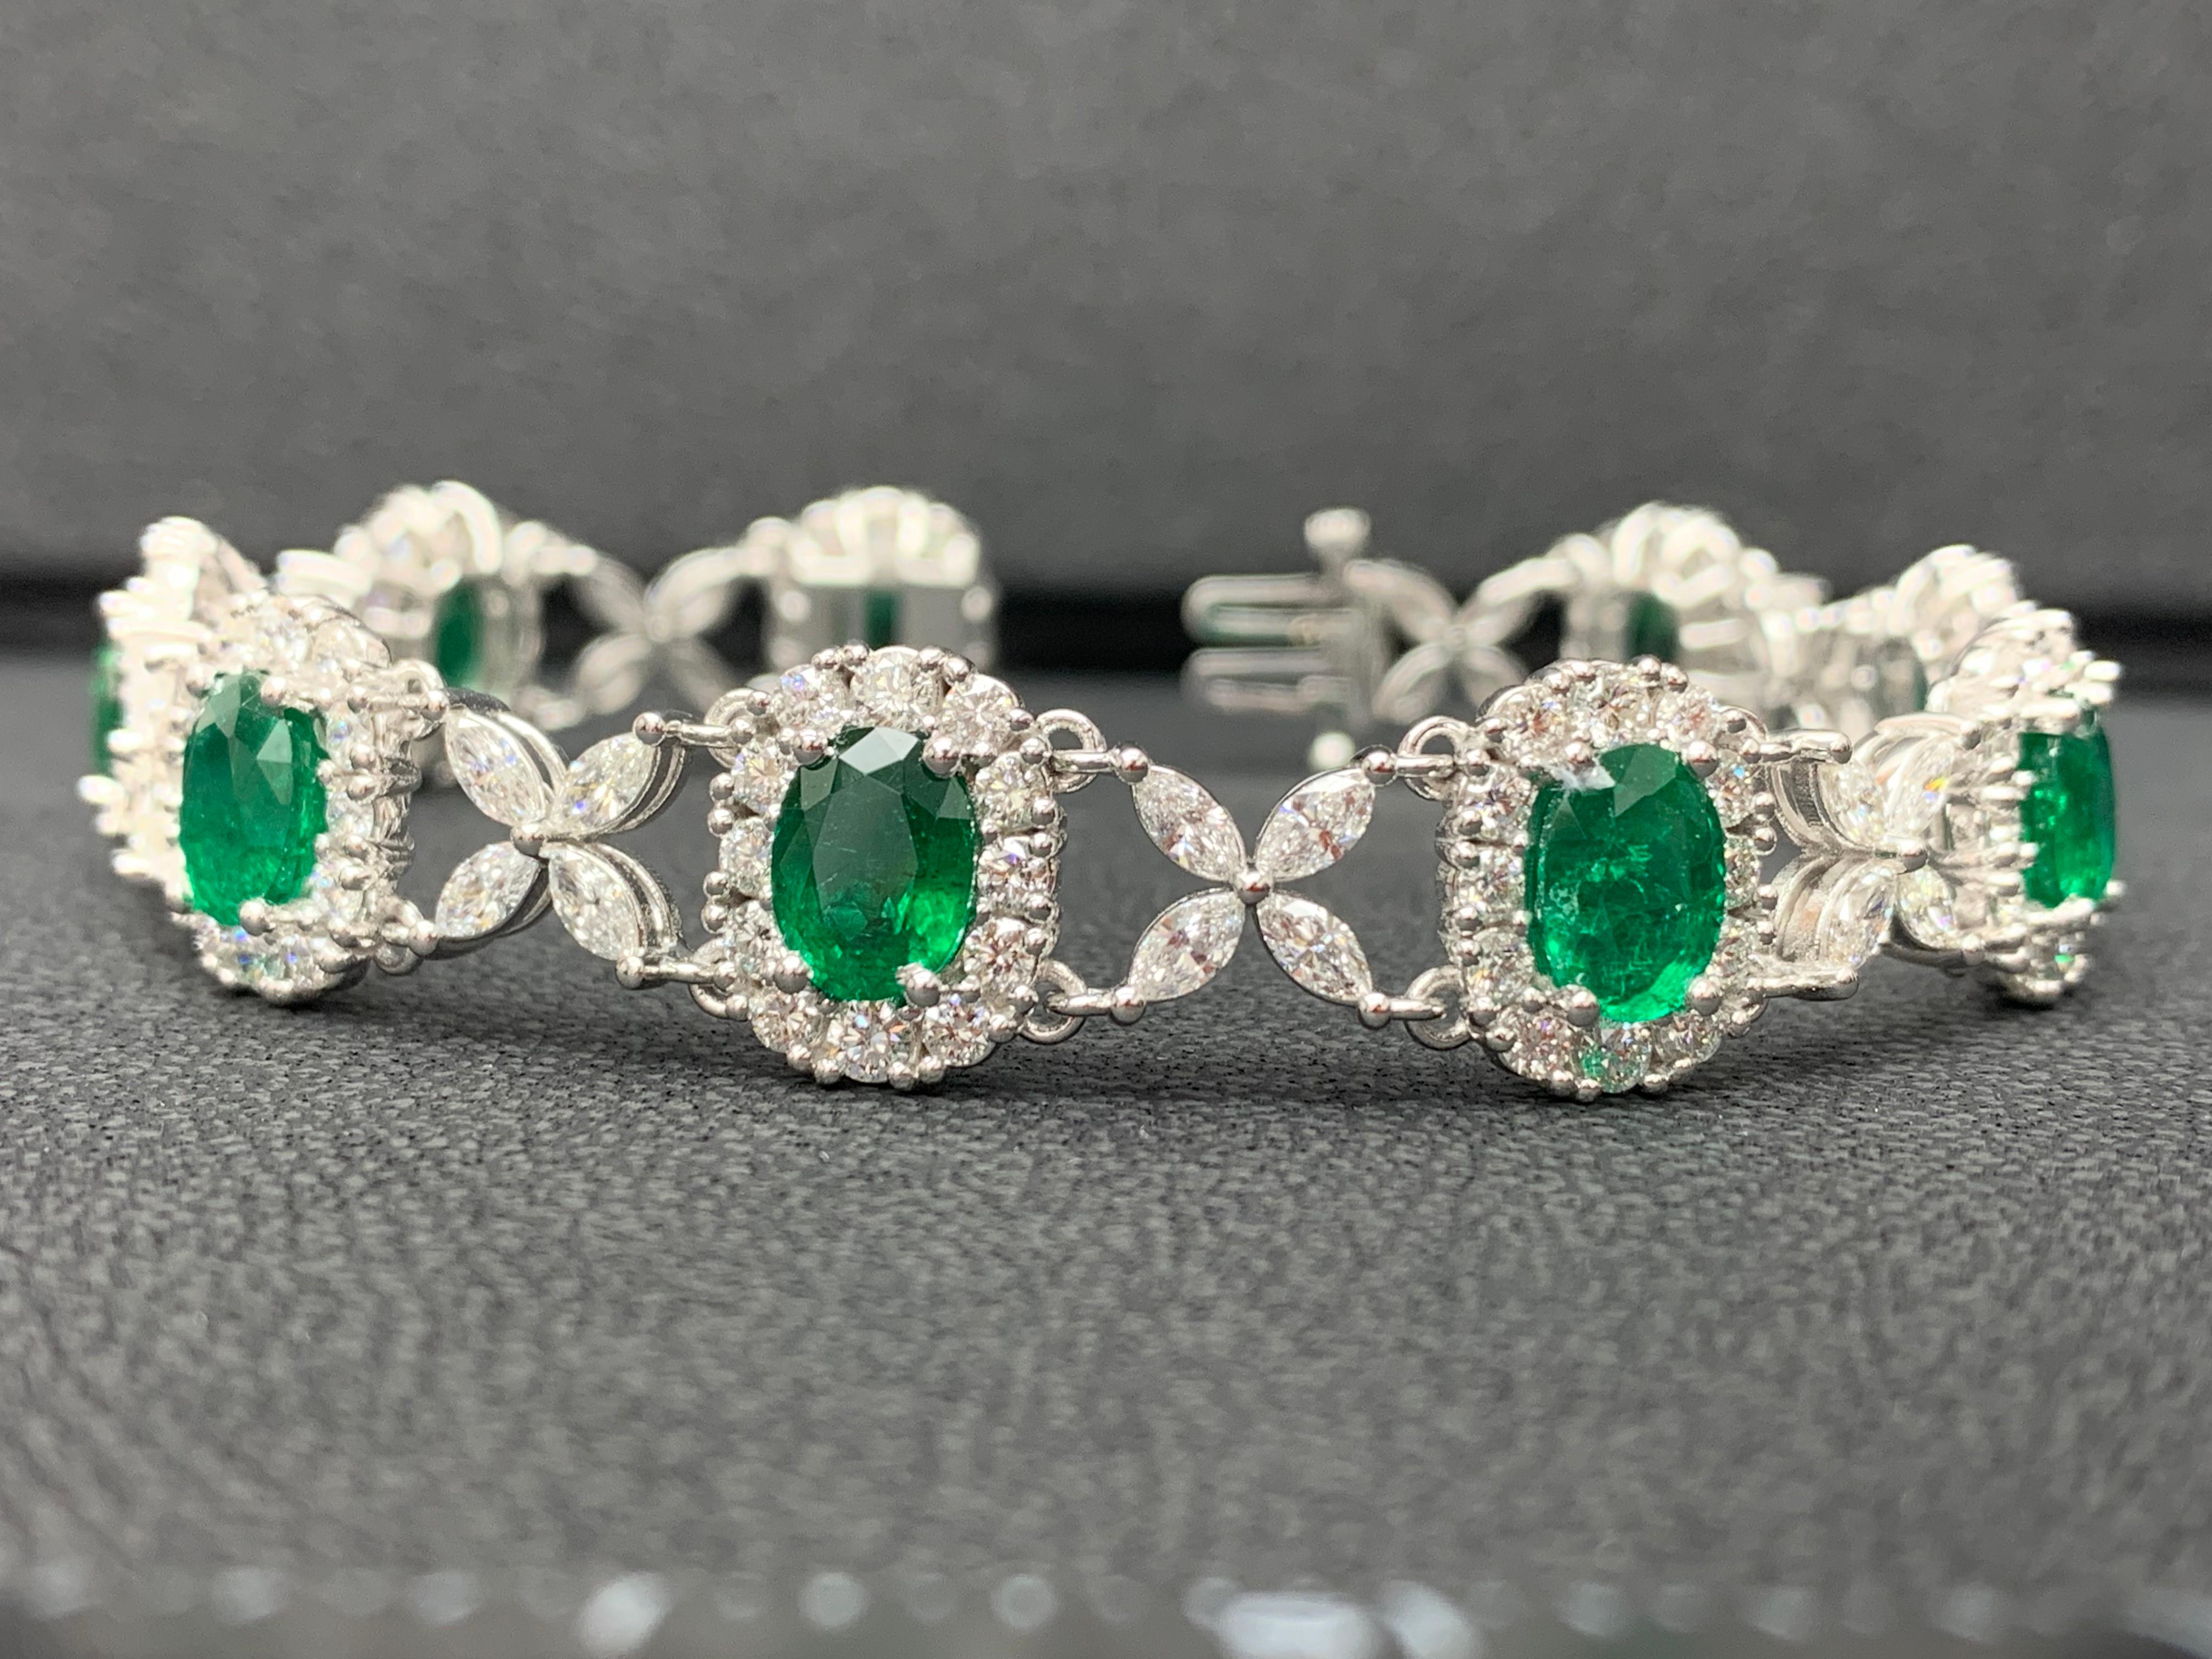 10.52 Carat Oval Cut Emerald and Diamond Tennis Bracelet in 14K White Gold For Sale 2